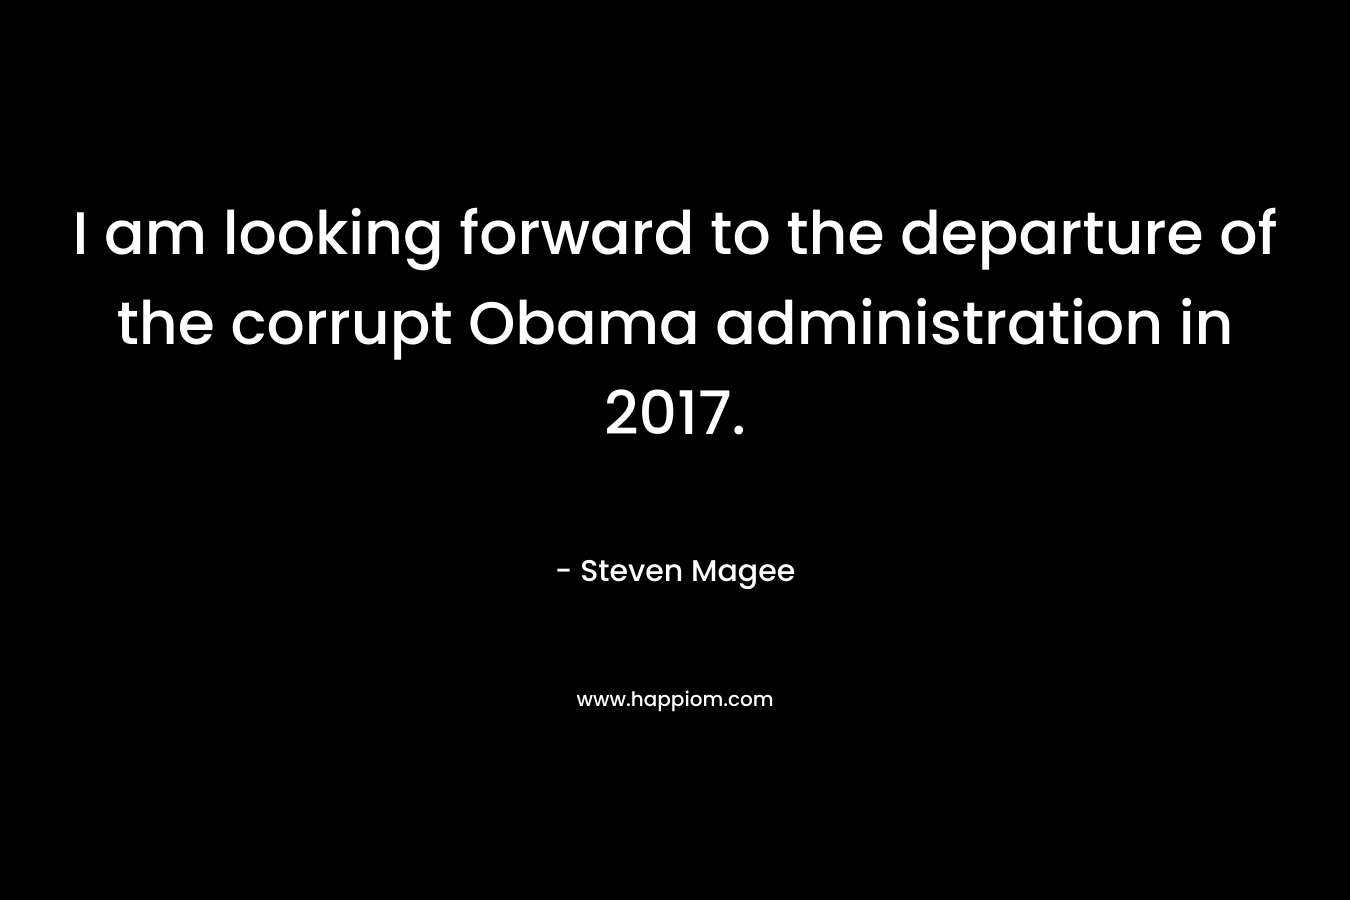 I am looking forward to the departure of the corrupt Obama administration in 2017.